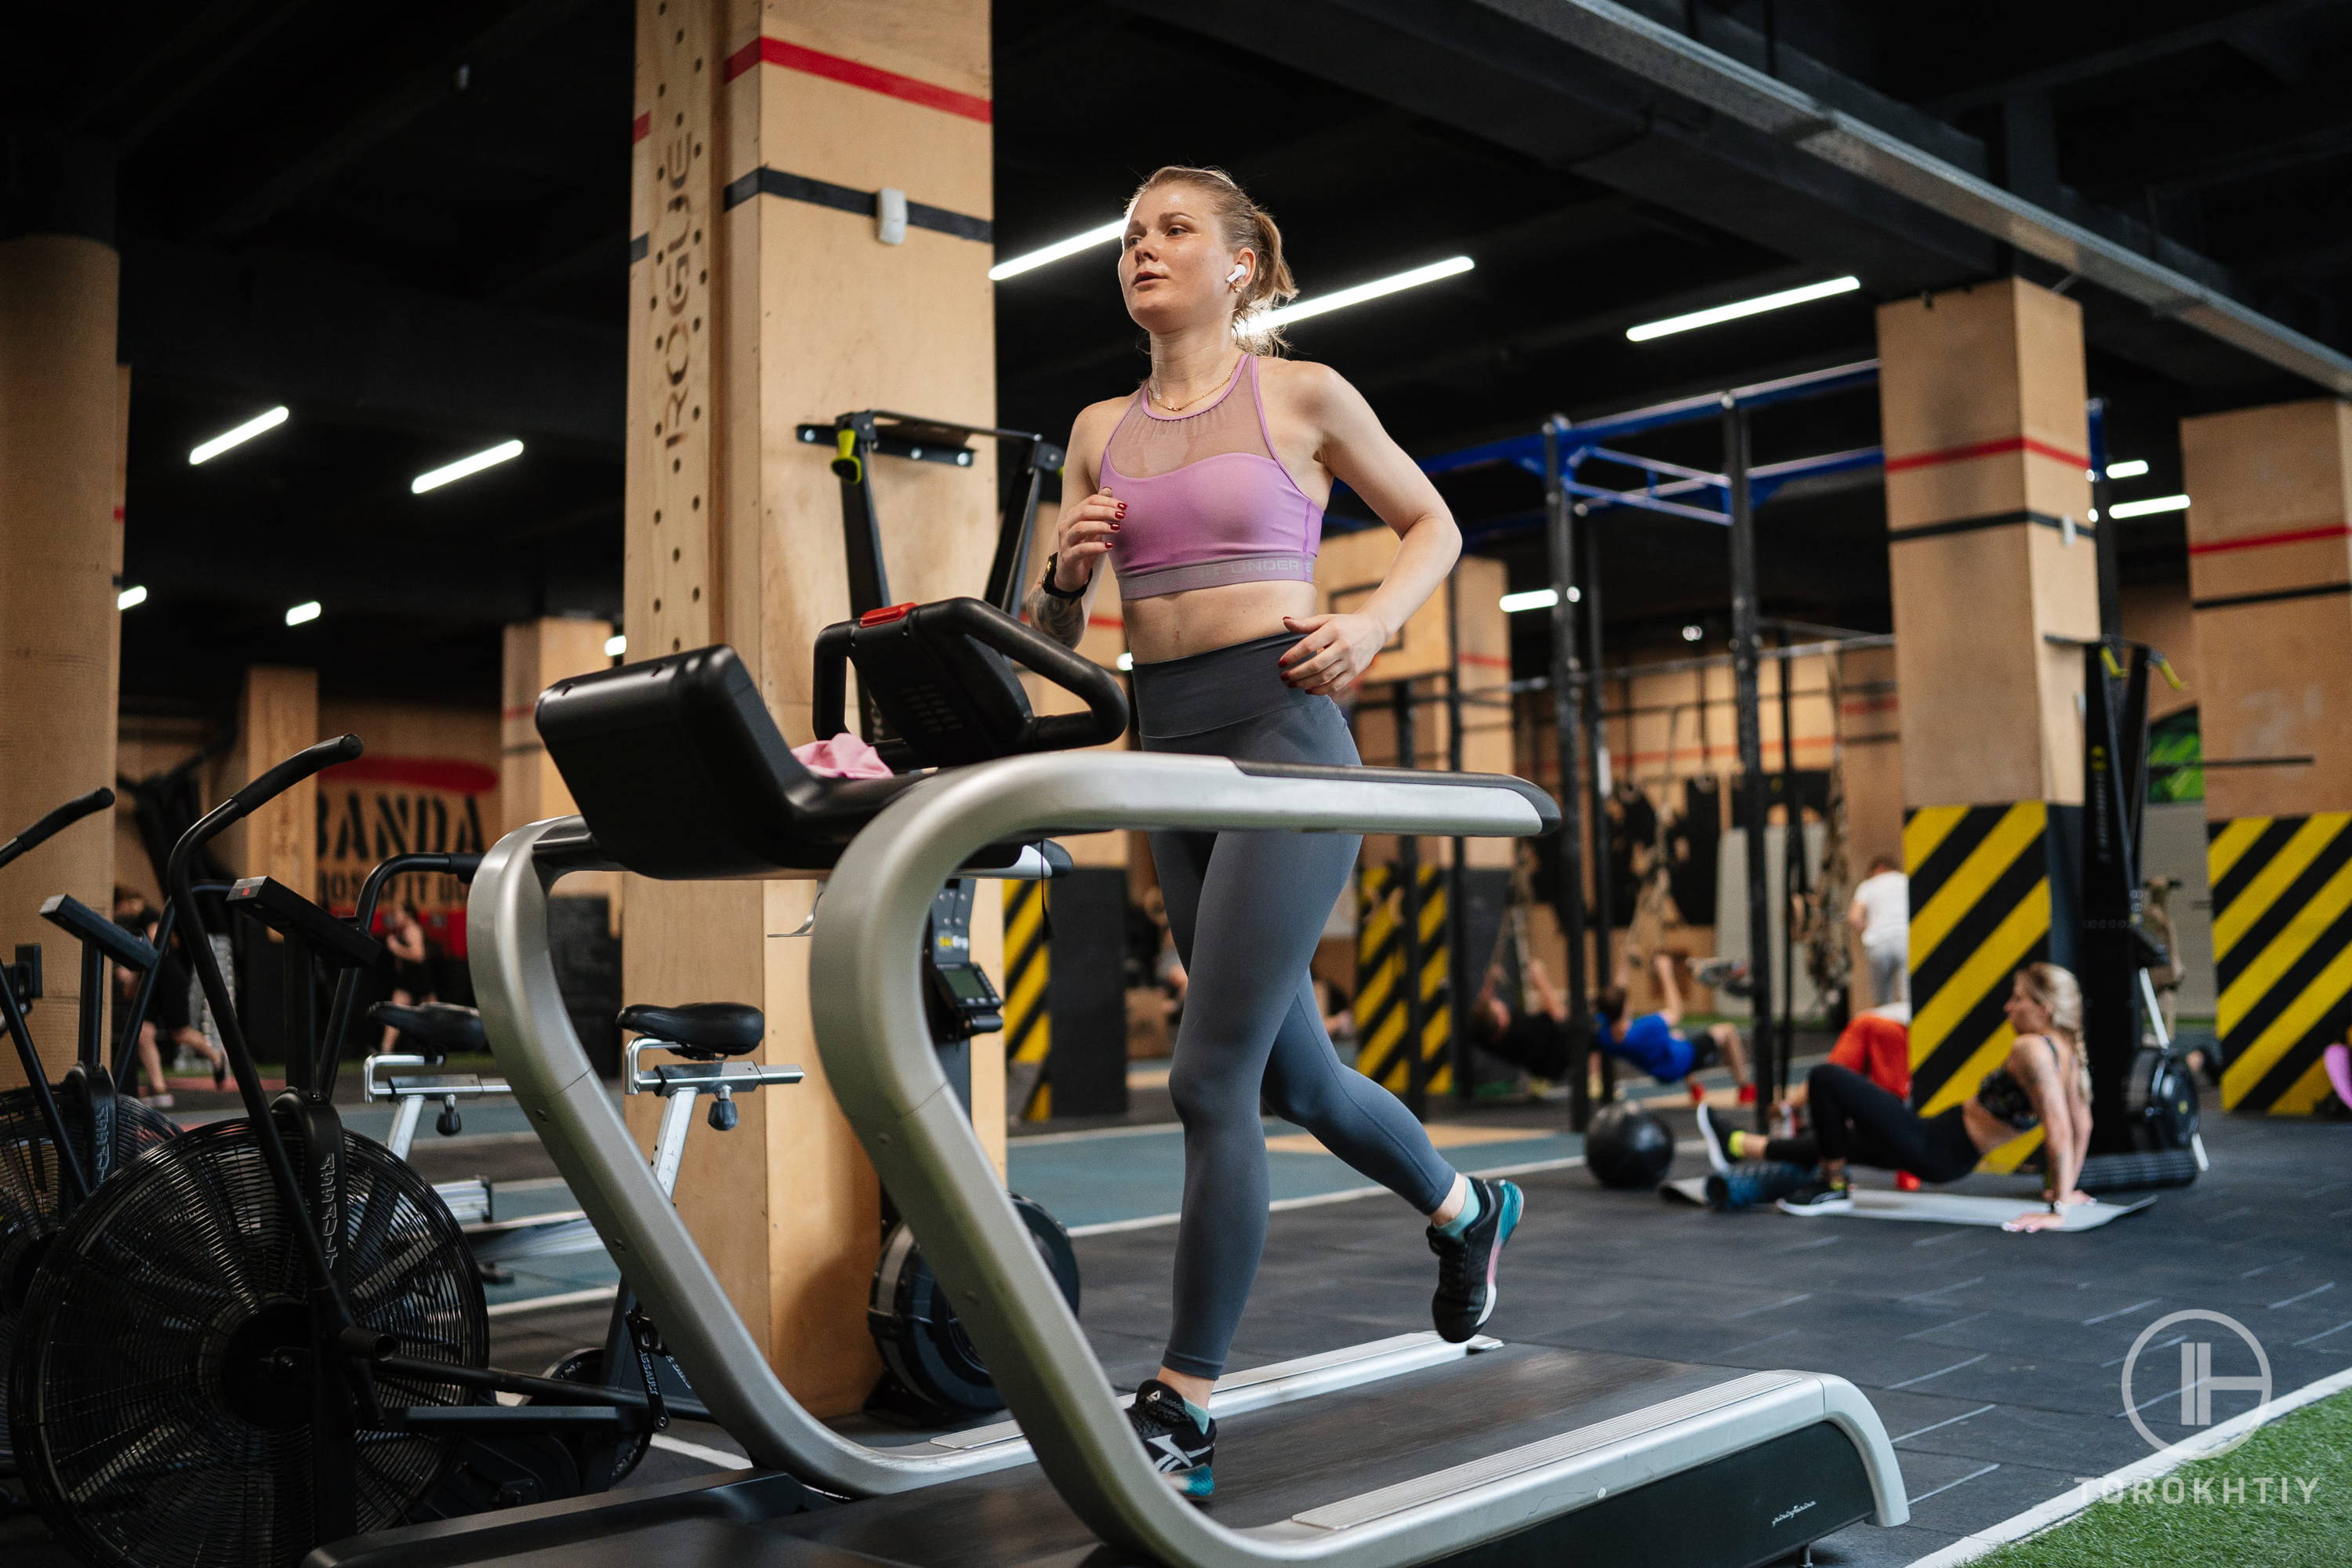 female athlete in pink top running on a treadmill in a gym